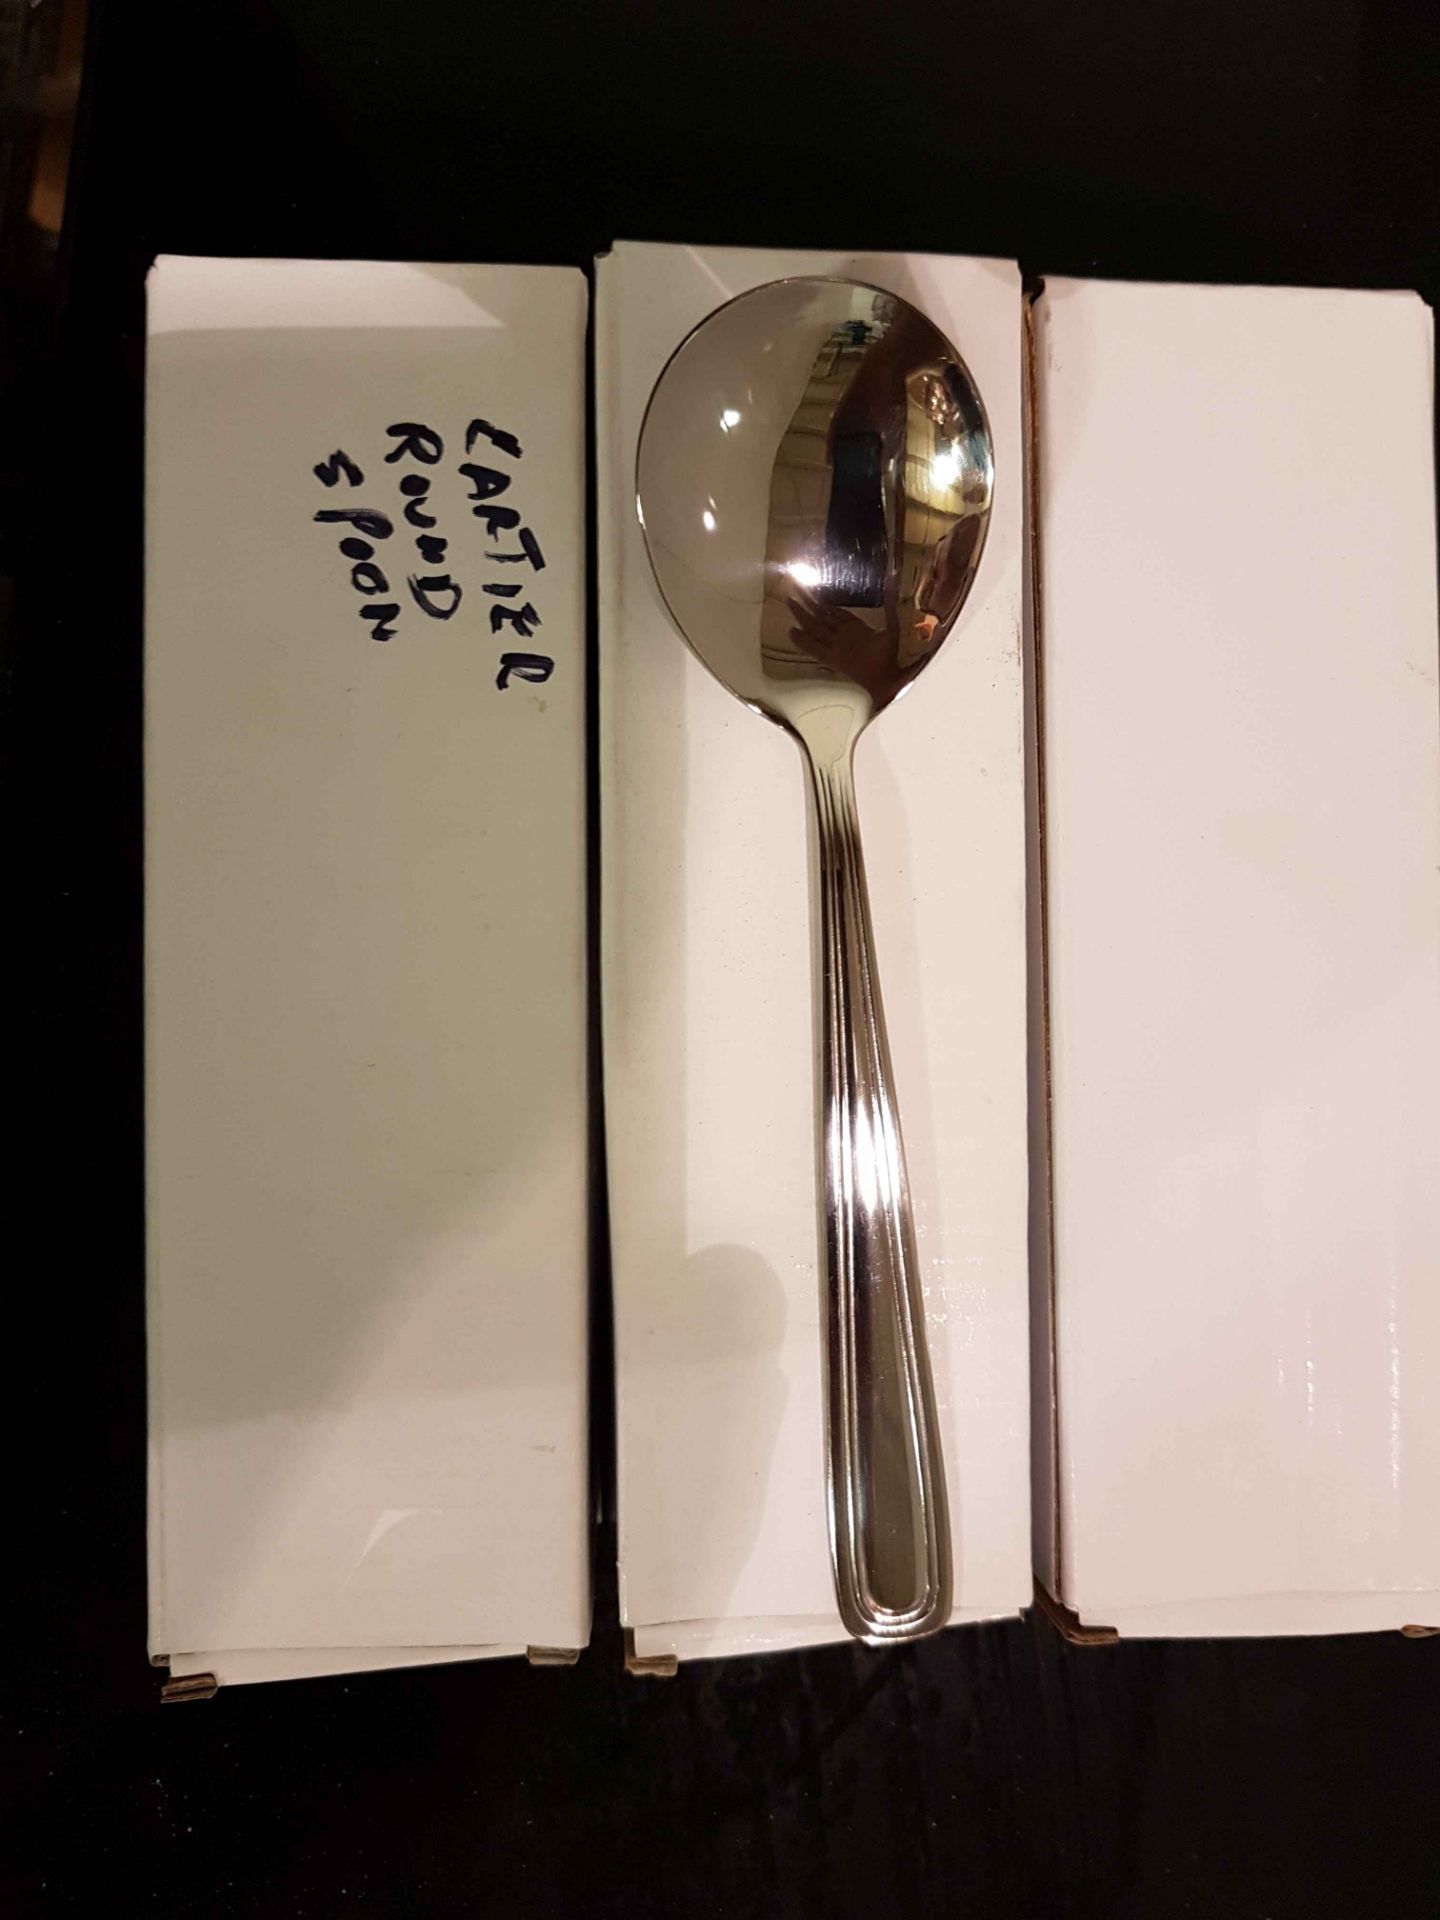 "Cartier" Round Spoons - Lot of 36